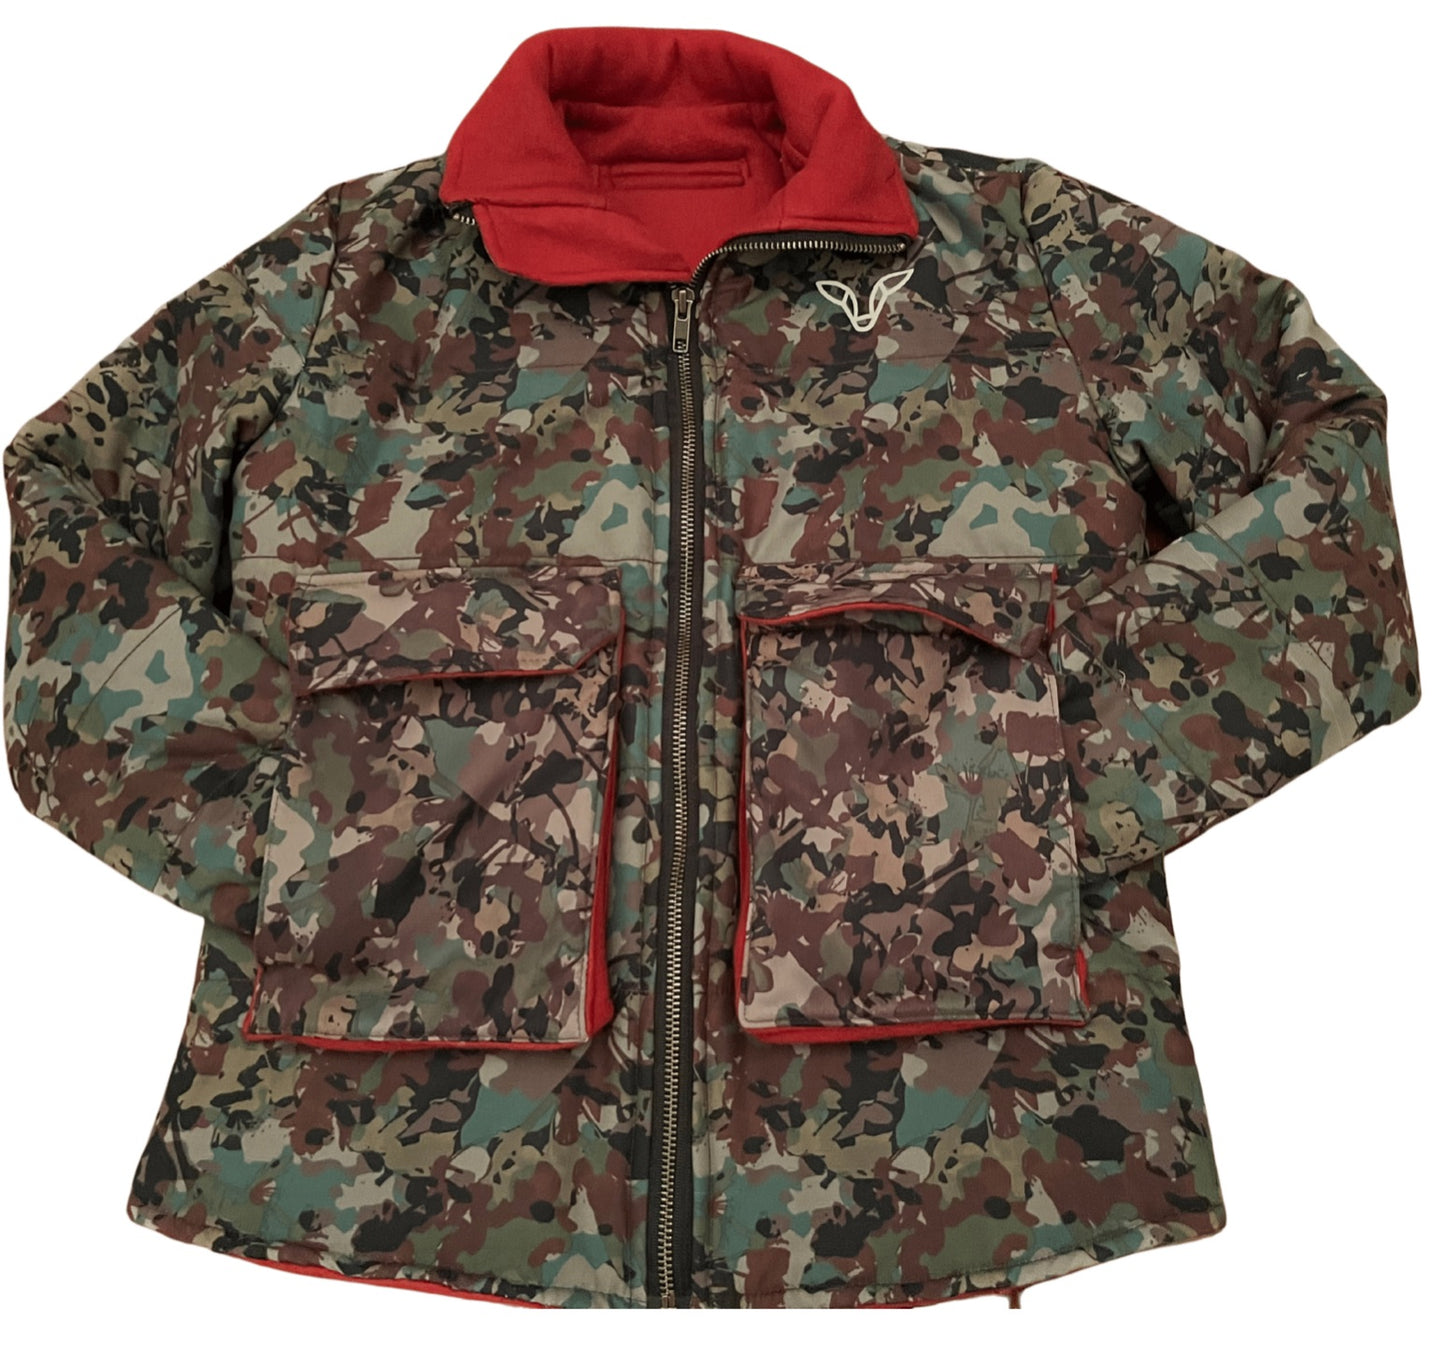 Cumberland Jacket - Girls Camo pattern with fleece liner. Hunting youth jacket